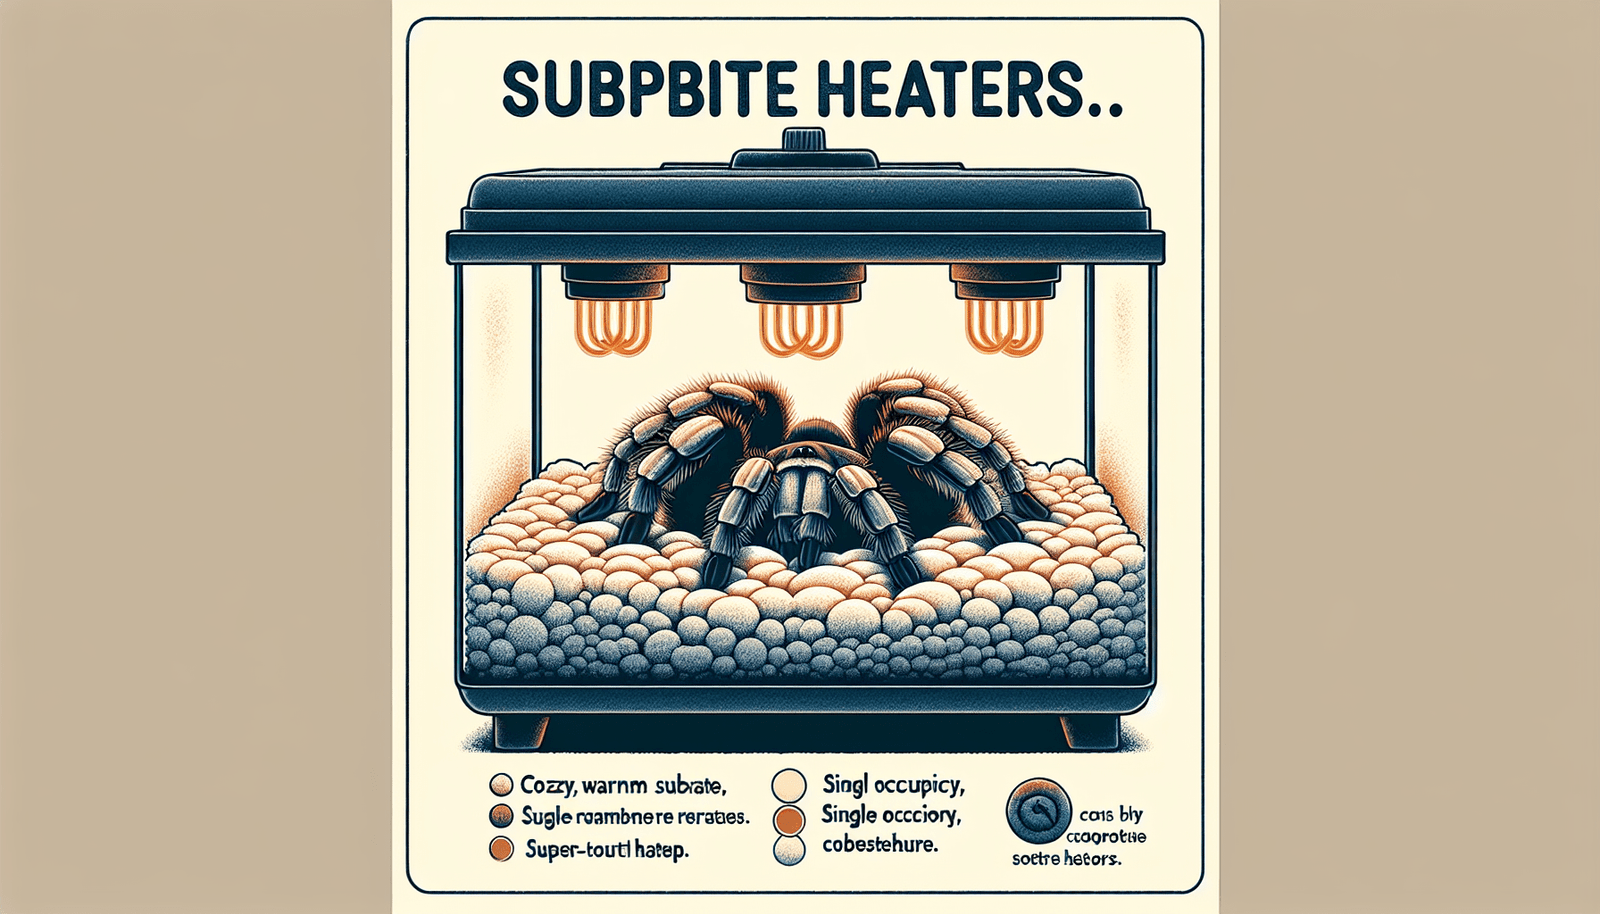 Can Tarantulas Be Kept In Enclosures With Substrate Heaters?